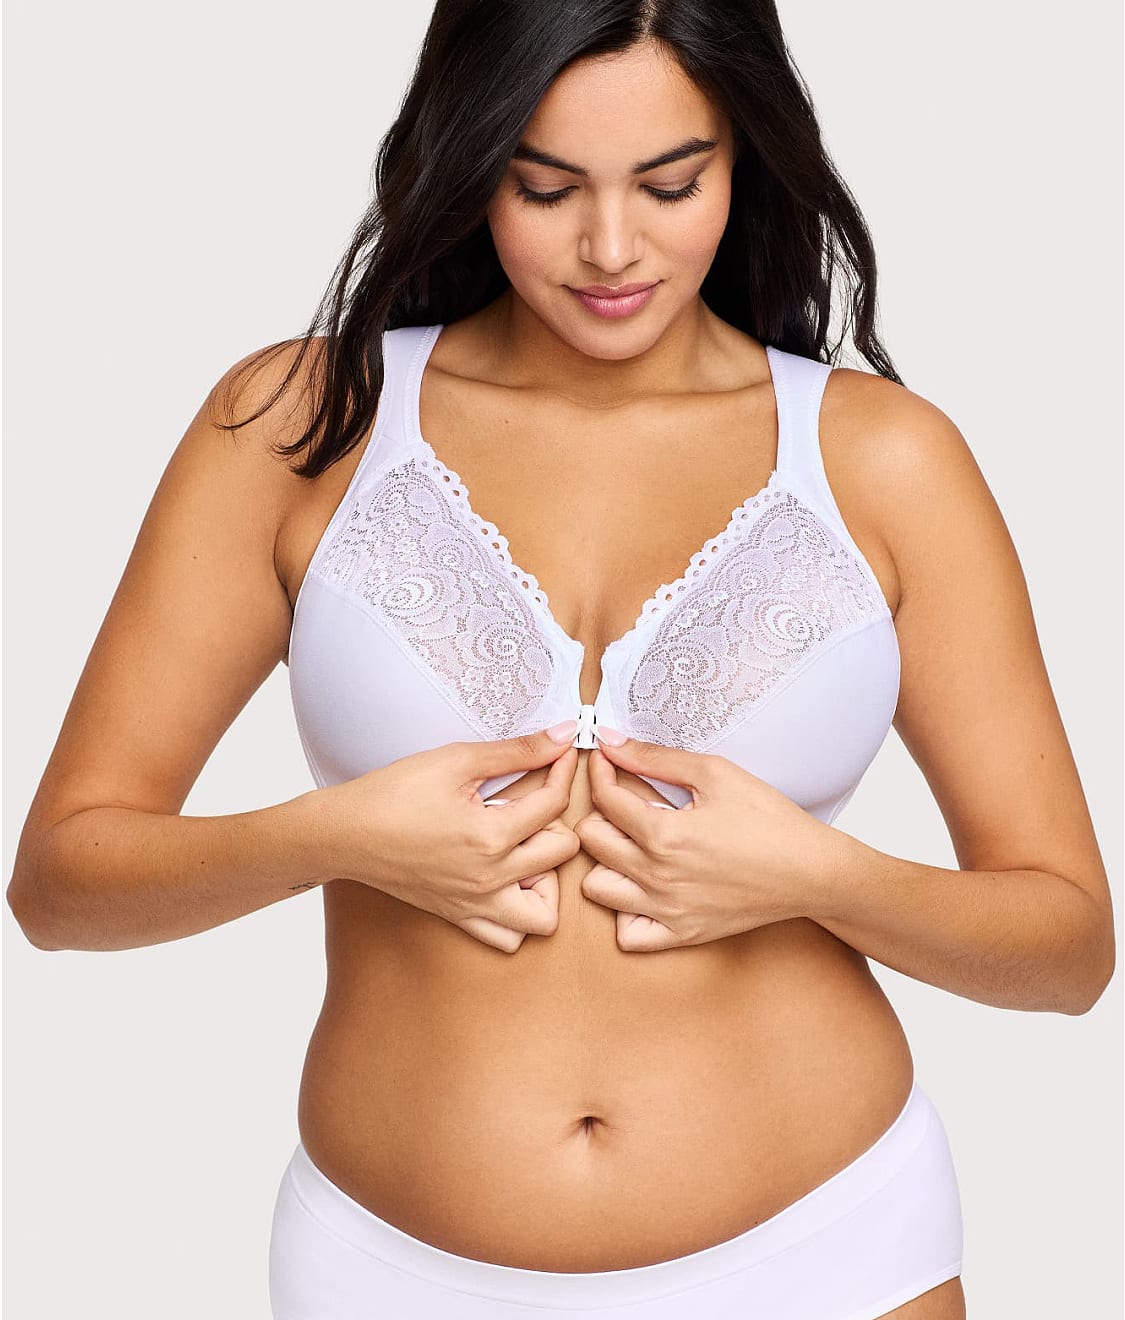 Ample Bosom - We just wanted to let you know about the discontinued  Glamorise Front Fastening Bra. The Posture Support Front Fastening Soft Cup  Bra is discontinued and we have low stock.